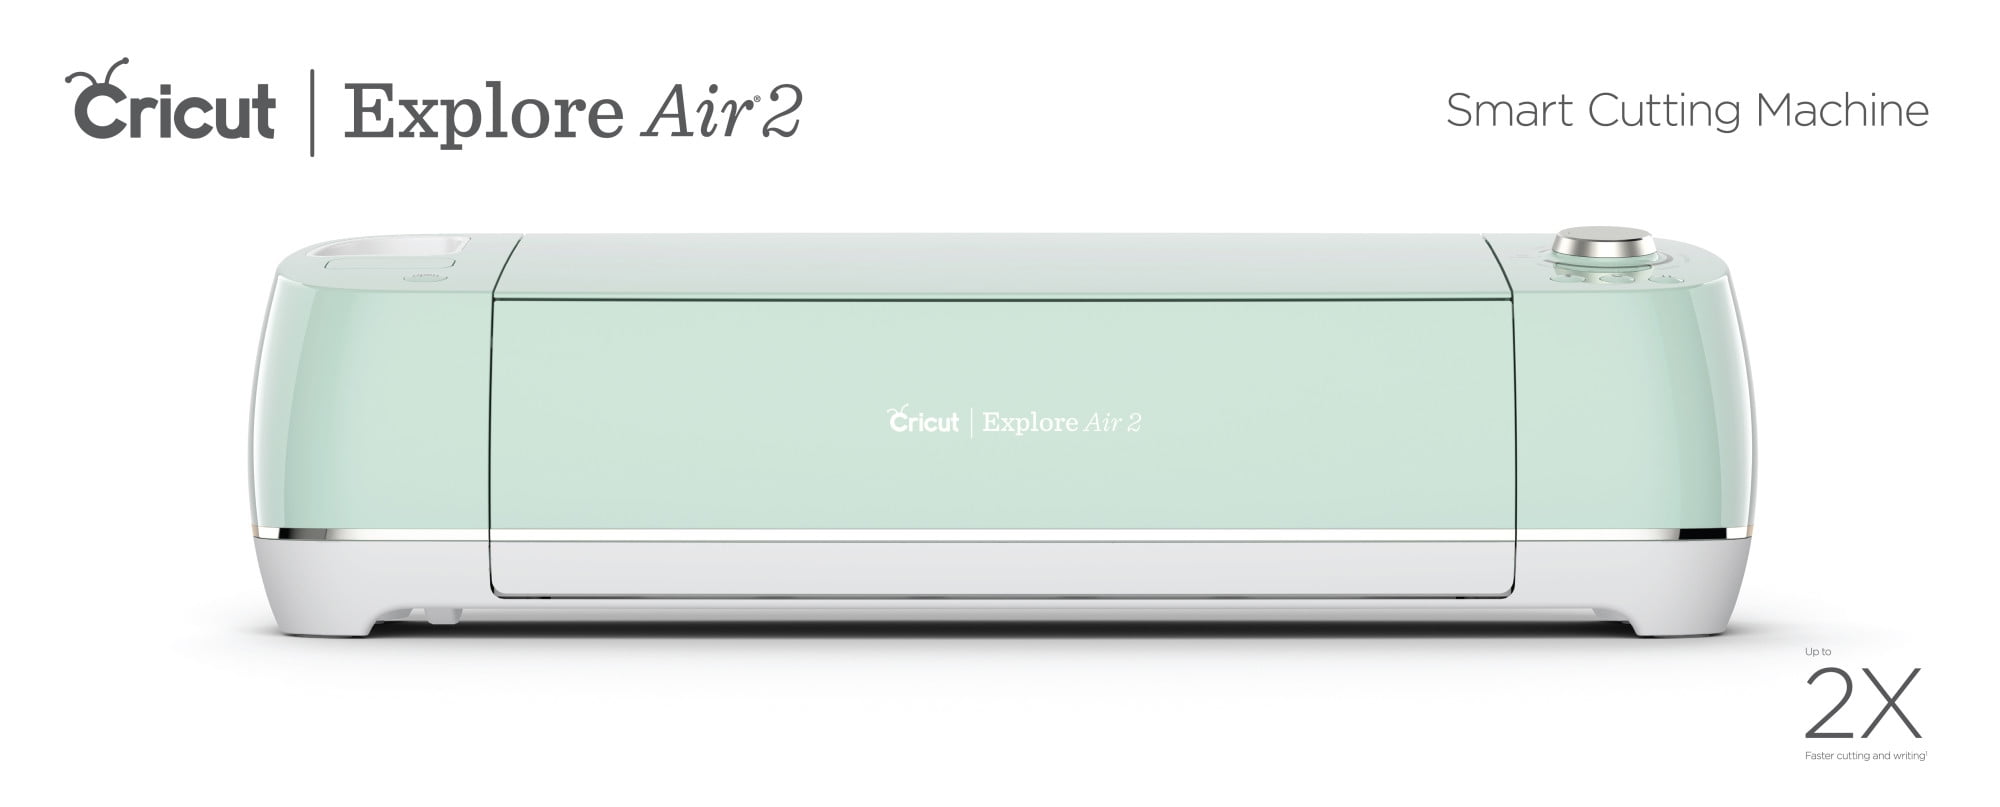 HOW IS THE CRICUT EXPLORE AIR 2 DIFFERENT FROM OTHER CUTTING MACHINES?